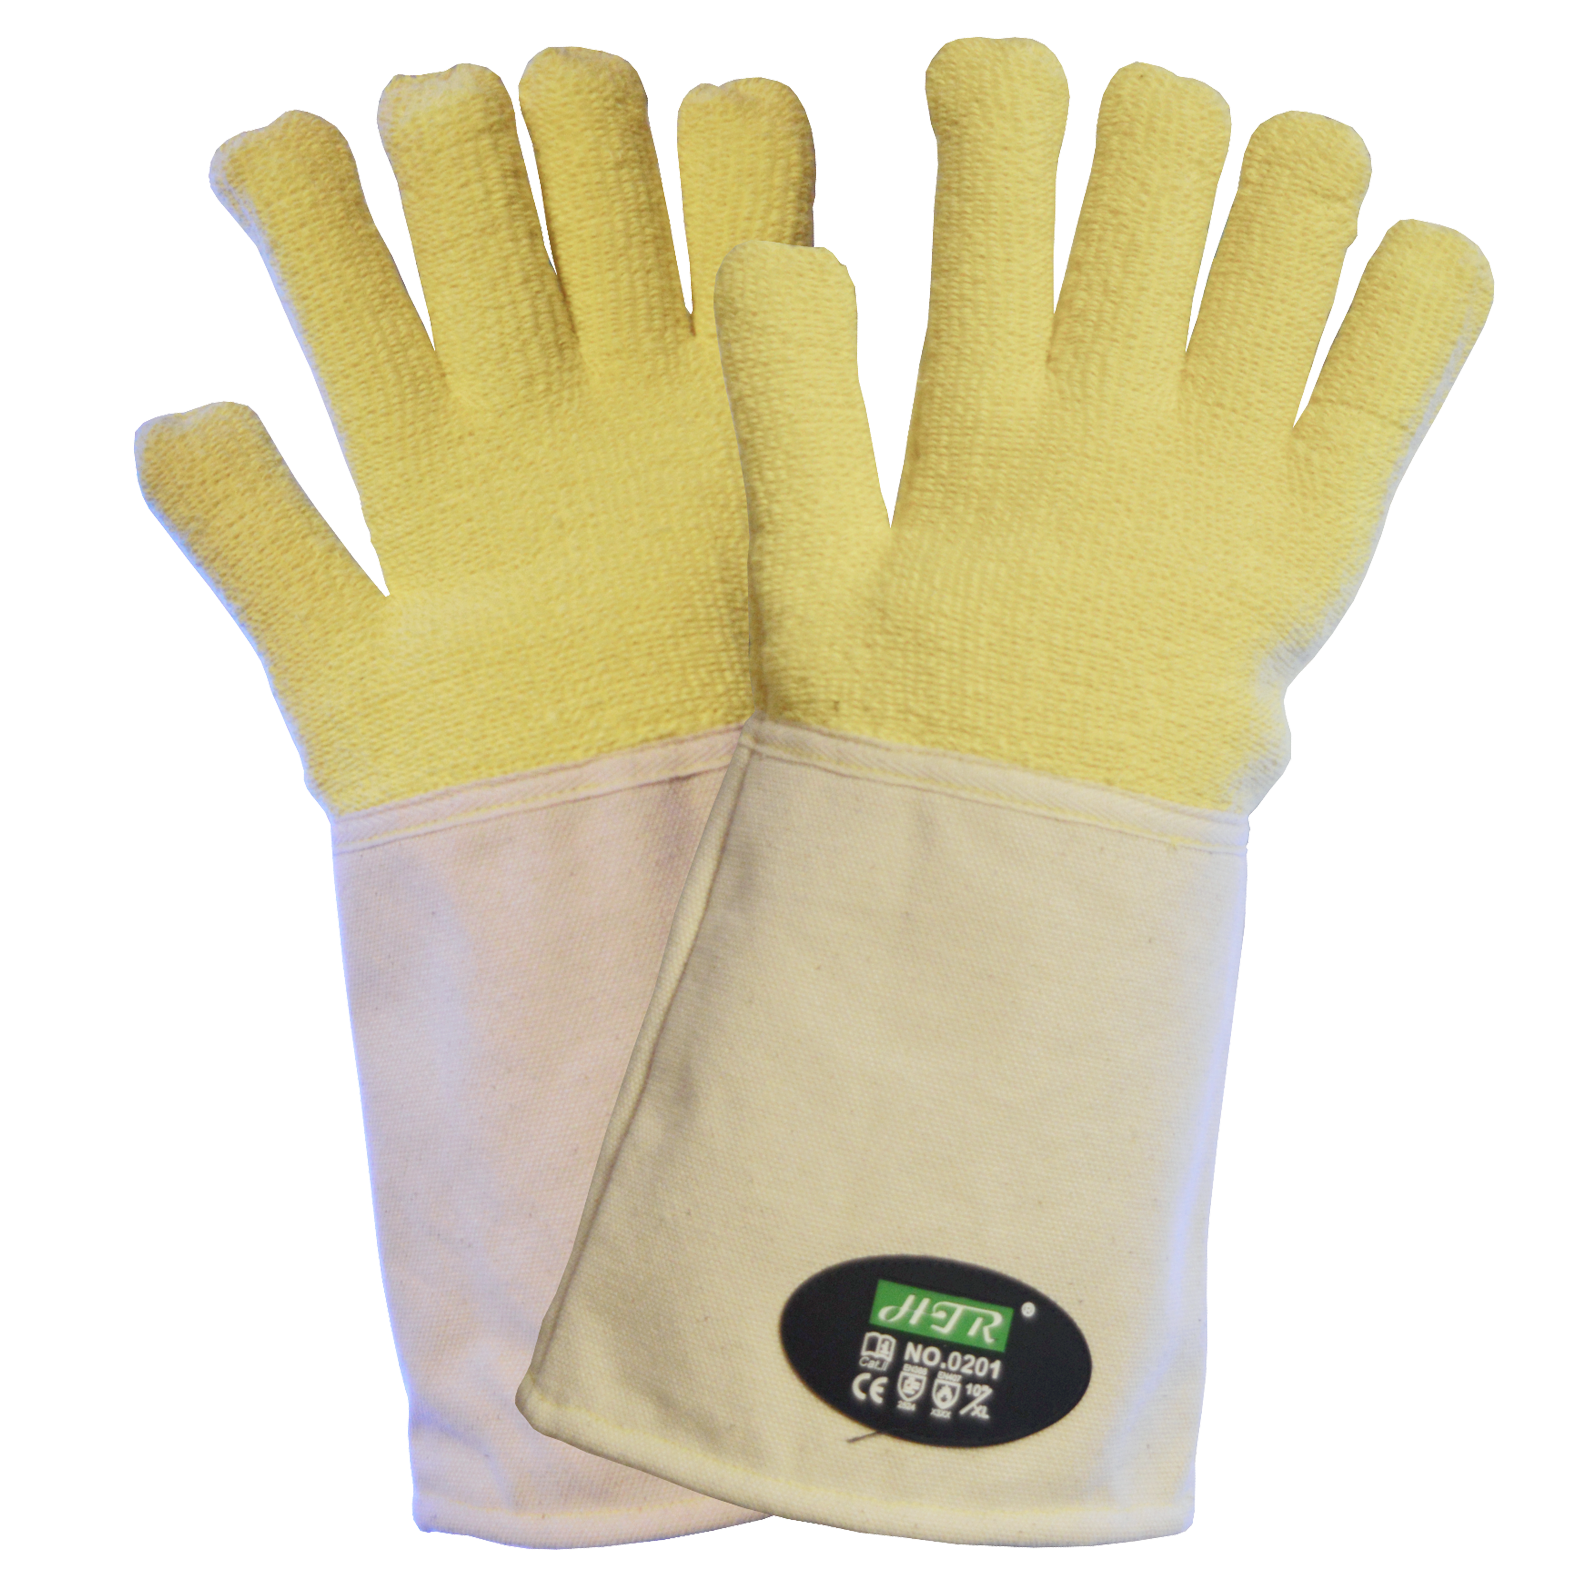 Terry heat resistant gloves